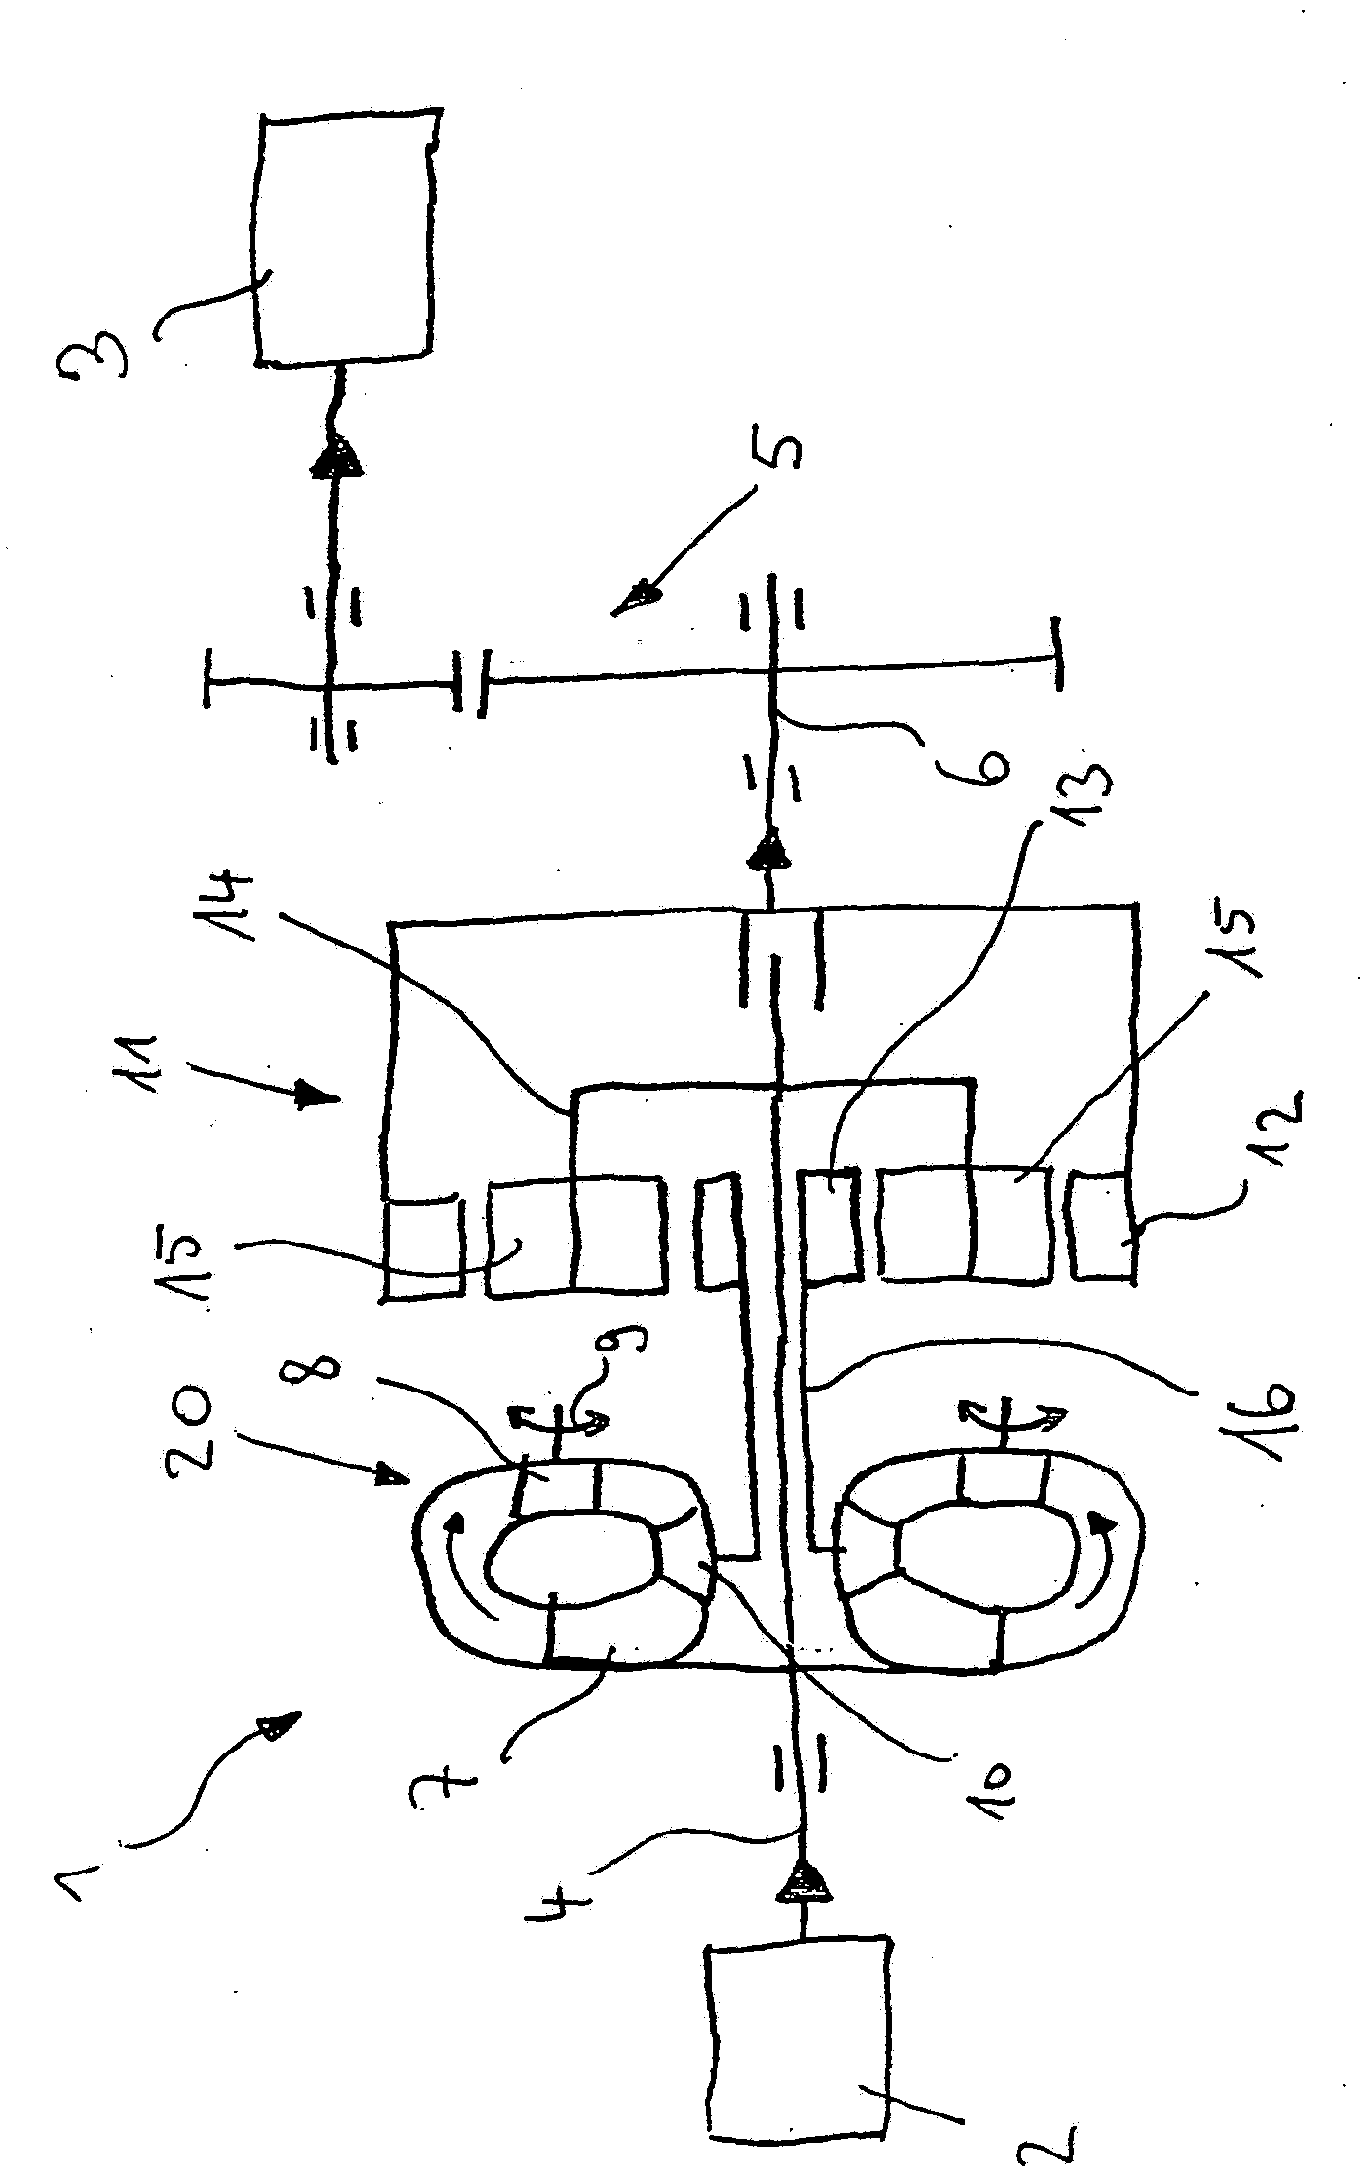 Device for transmitting force